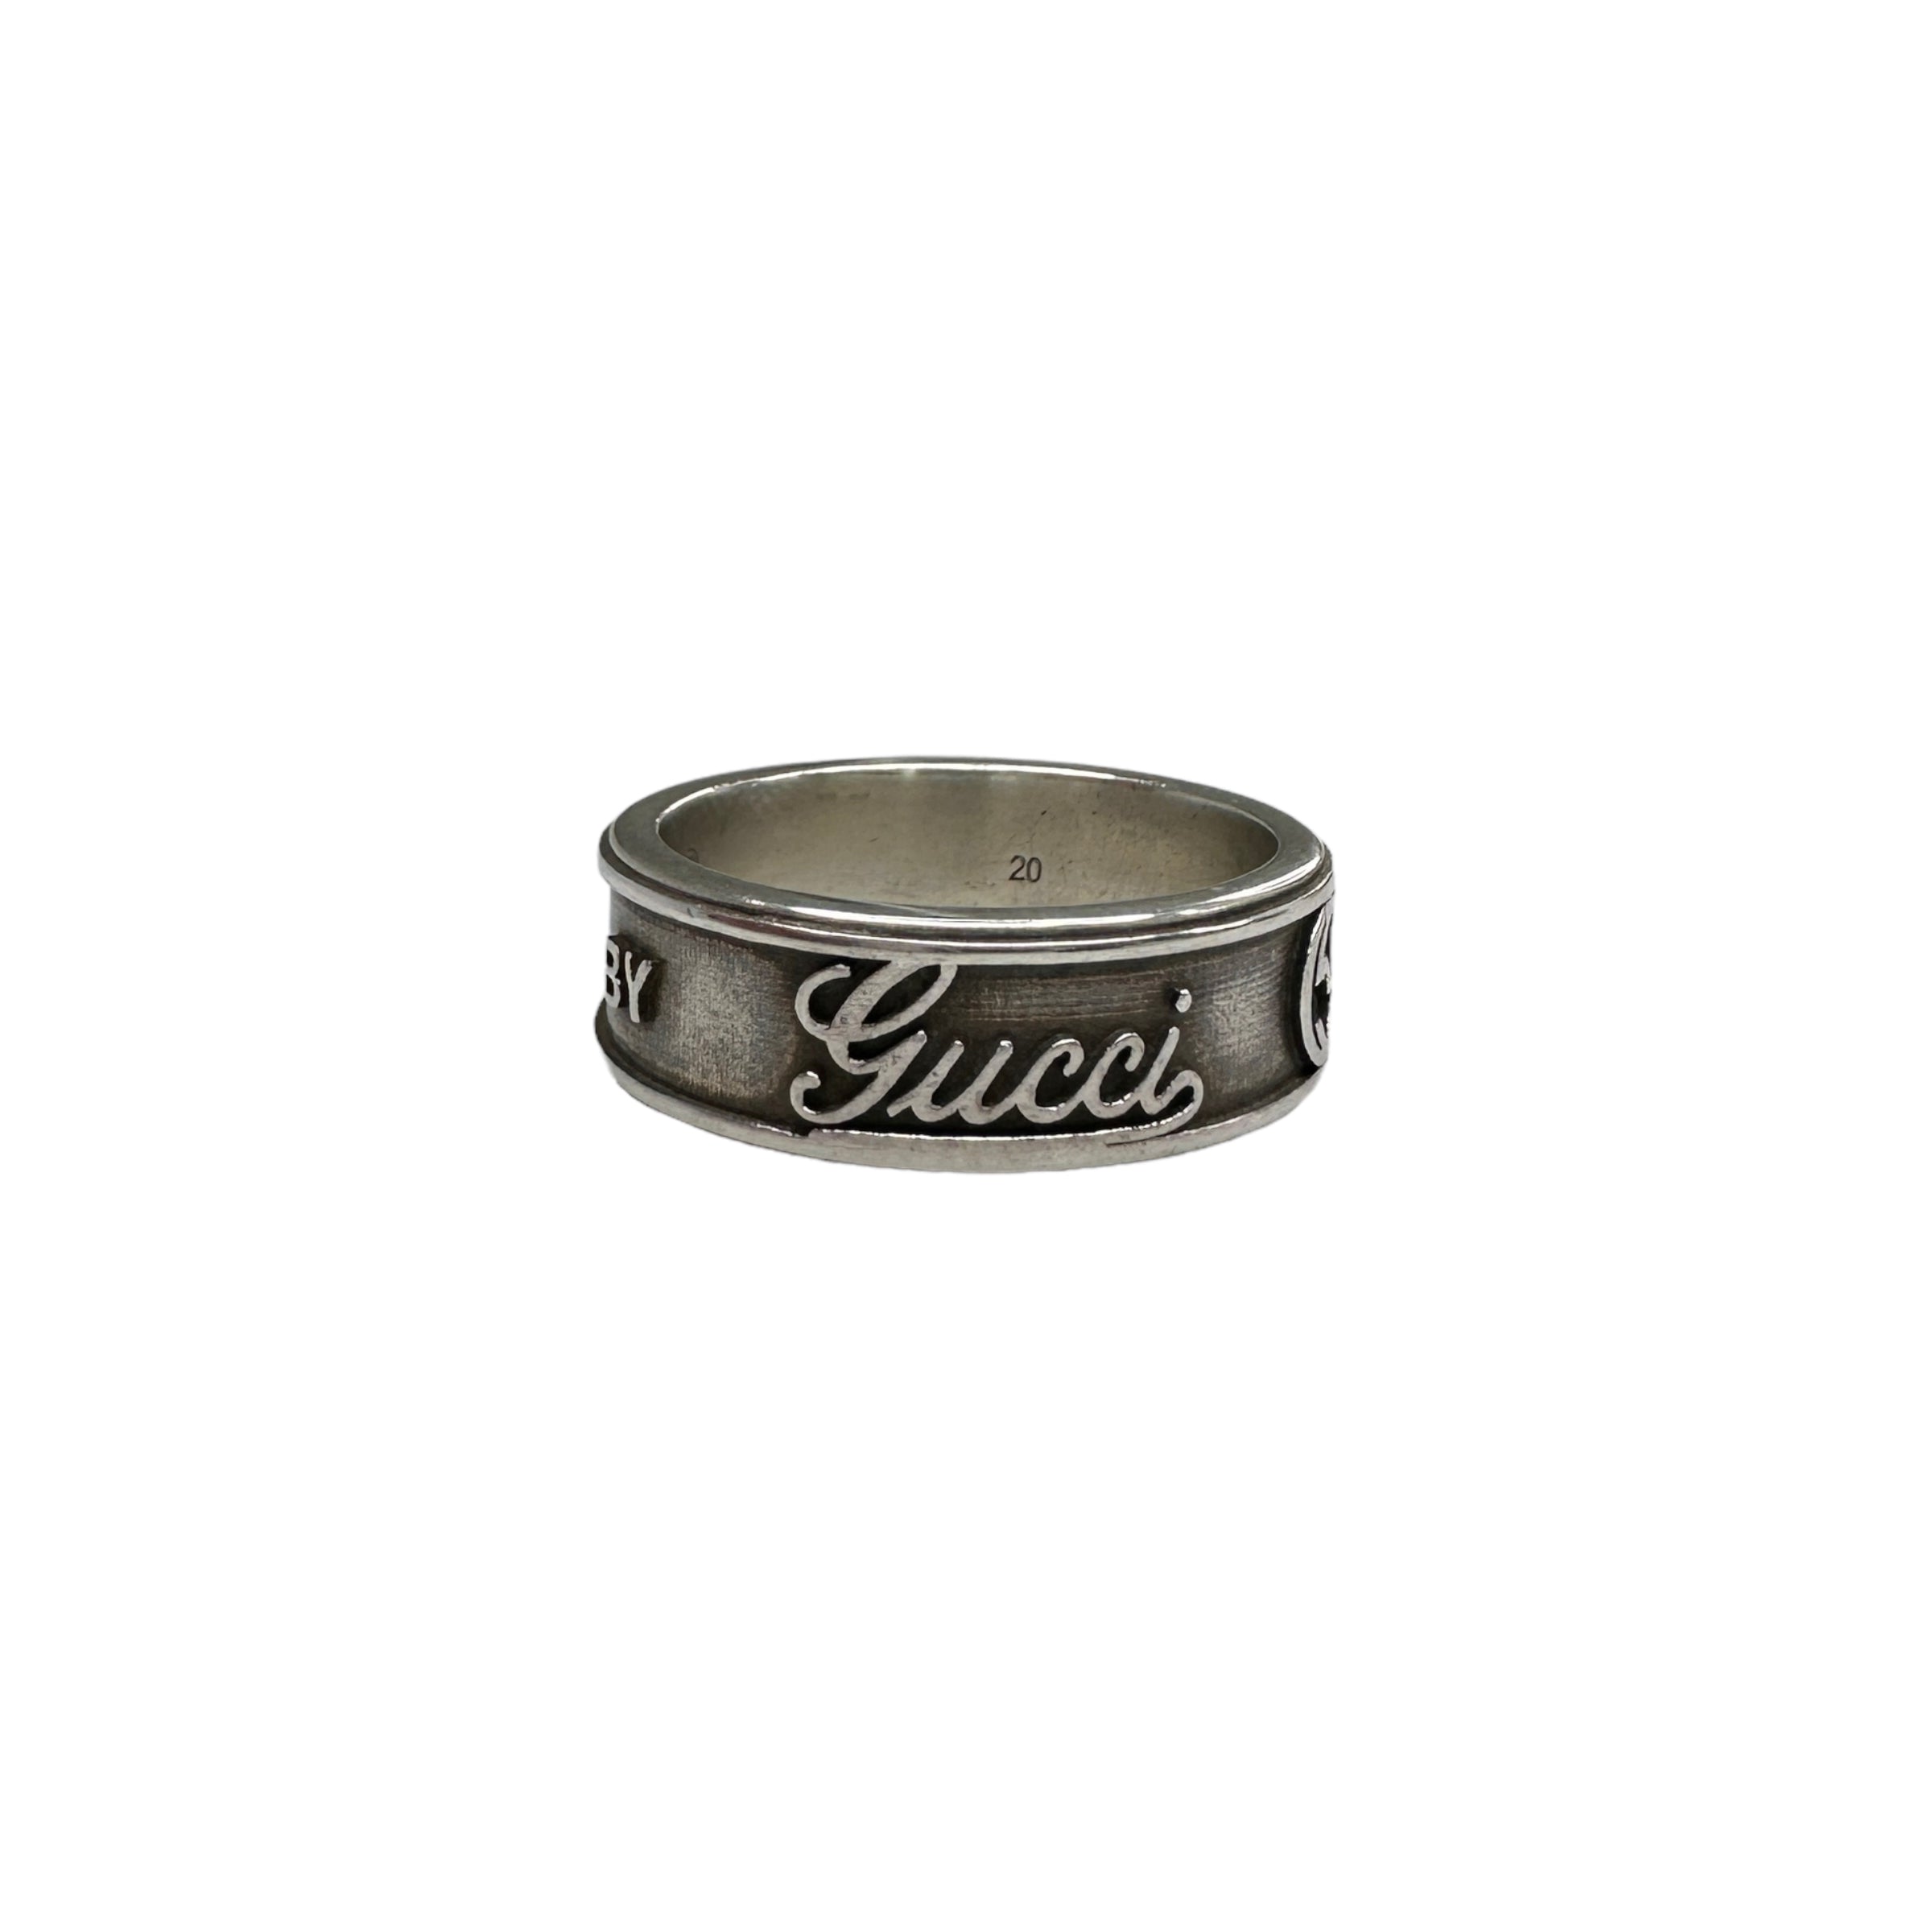 (20) GUCCI "MADE IN ITALY" RING